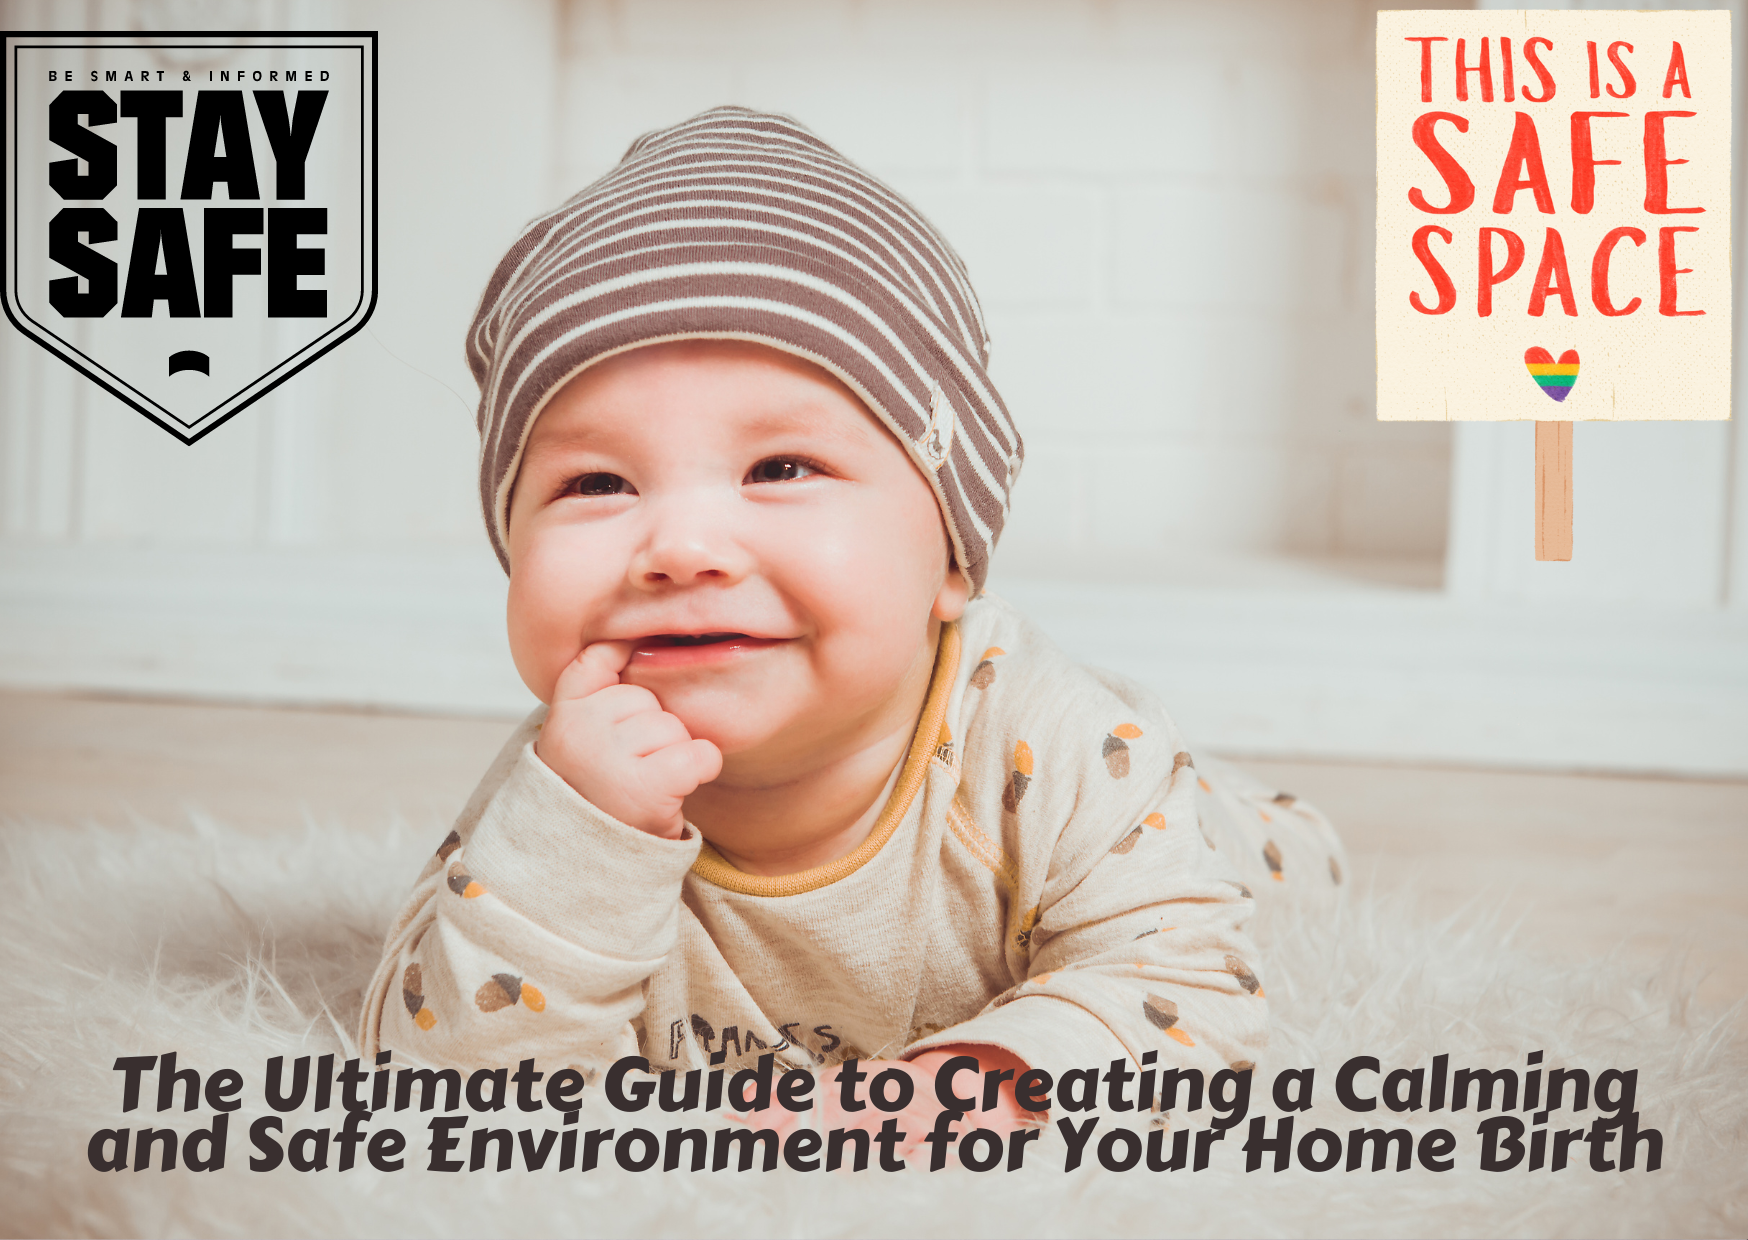 The Ultimate Guide to Creating a Calming and Safe Environment for Your Home Birth